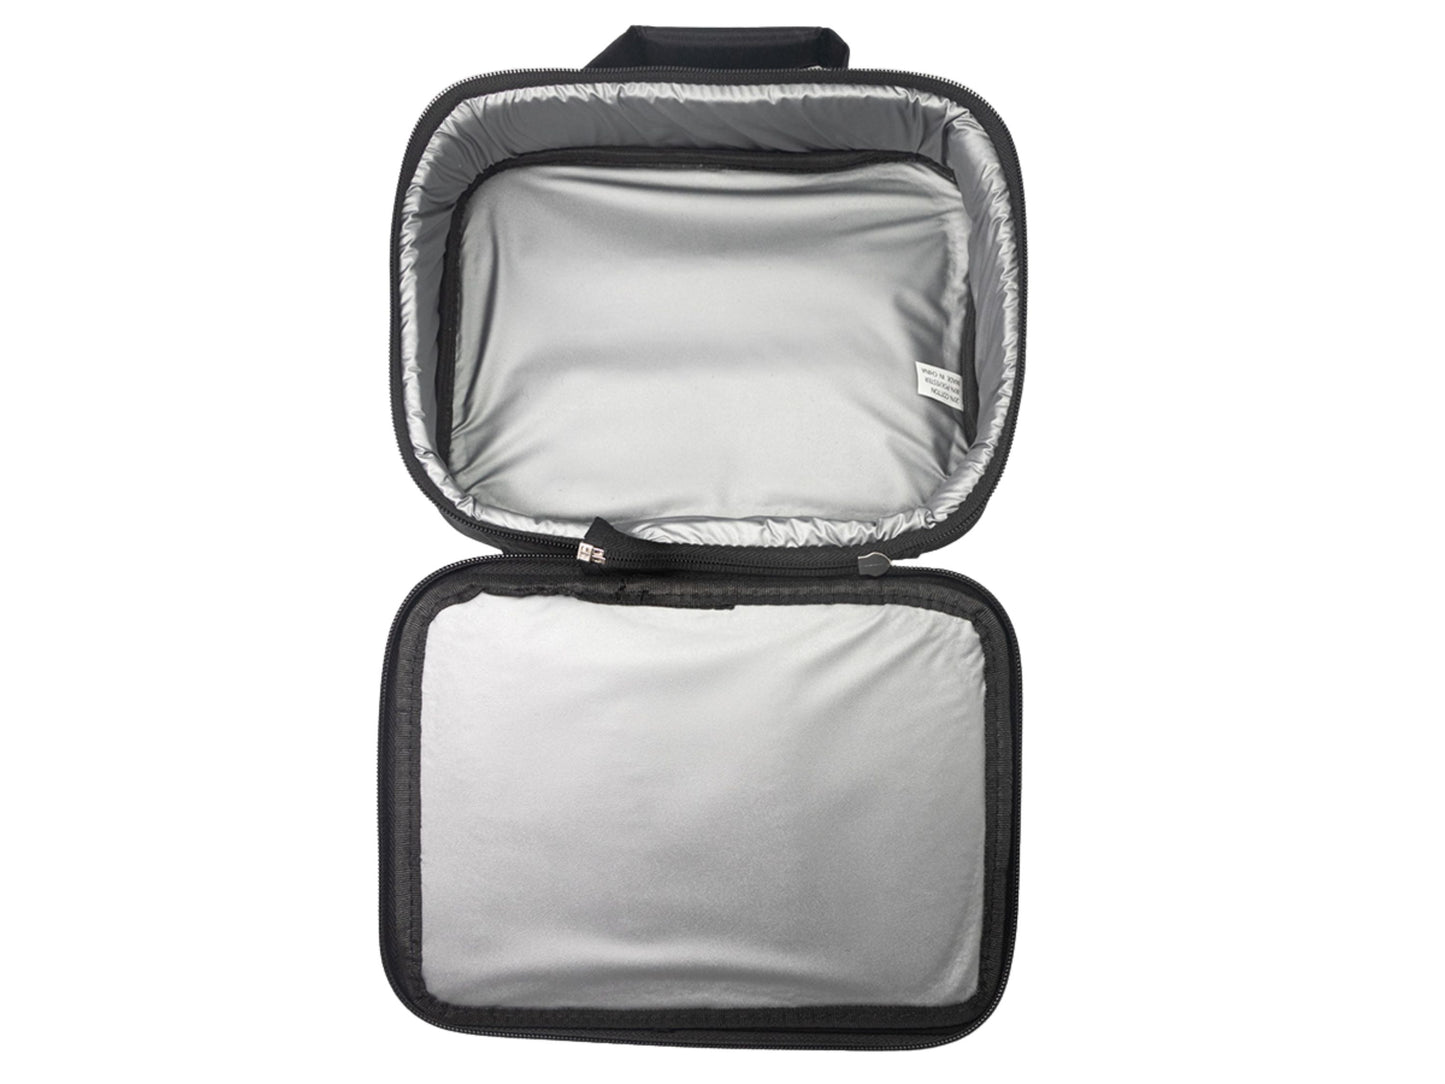 It's a Good Day for a Good Day Insulated Lunch Box